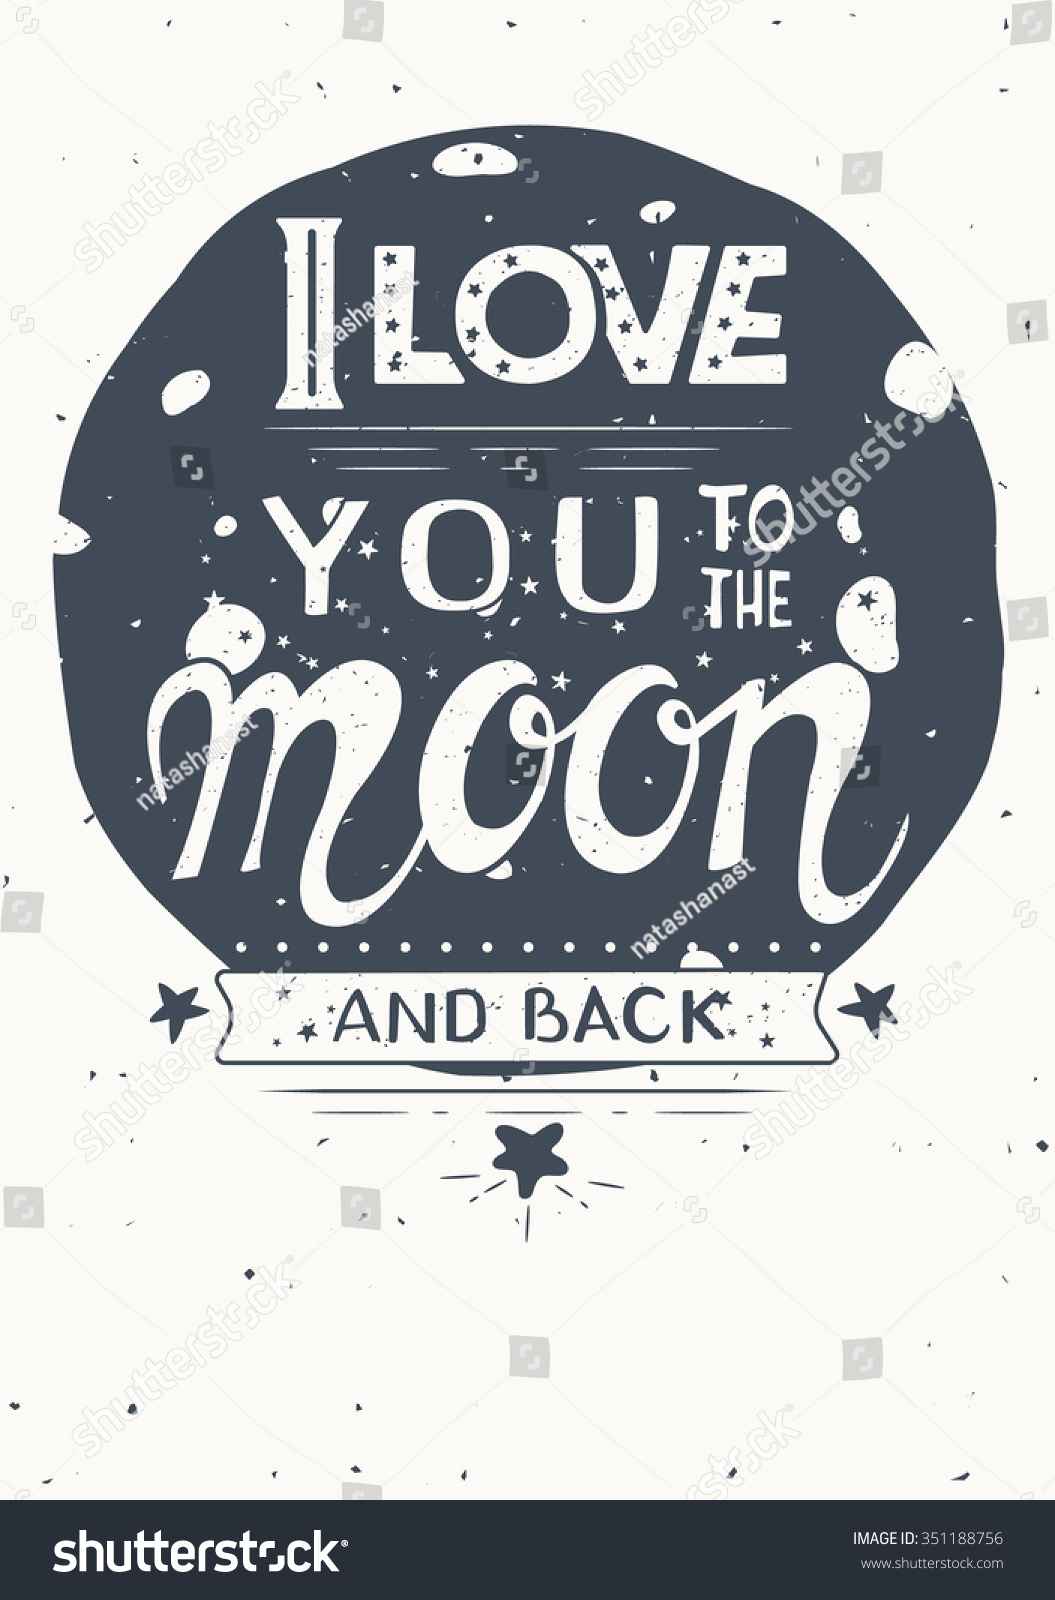 Poster with quote I love you to the moon and back Hand drawn vintage